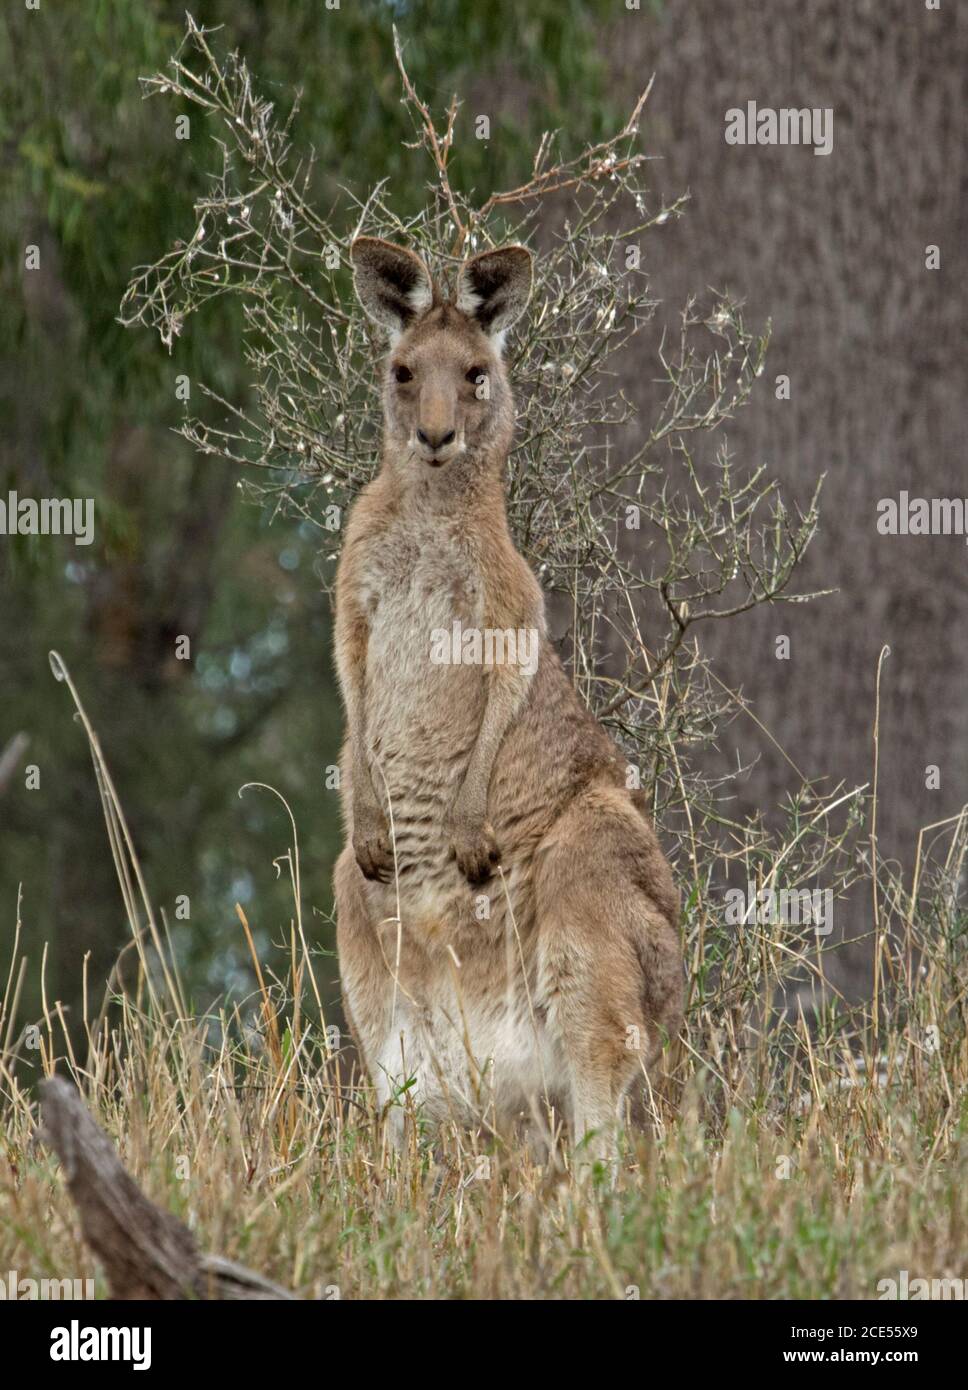 Australian Eastern Grey kangaroo alert and  staring at camera, in the wild, with background of grasses & green foliage Stock Photo